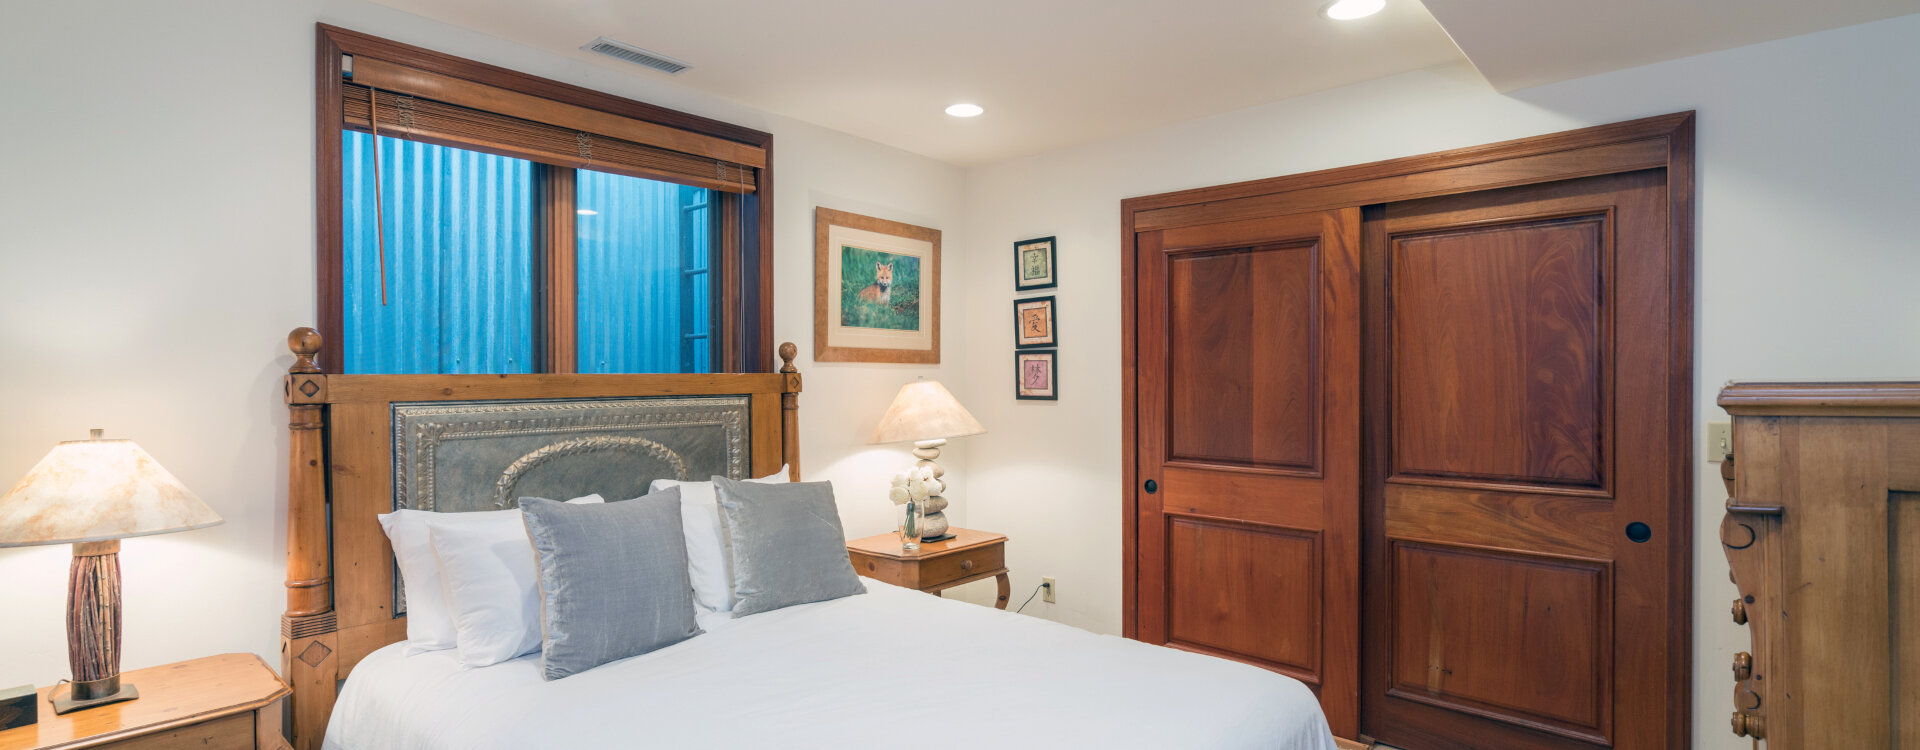 3.05-telluride-south-pacific-new-guest-bedroom-a-web